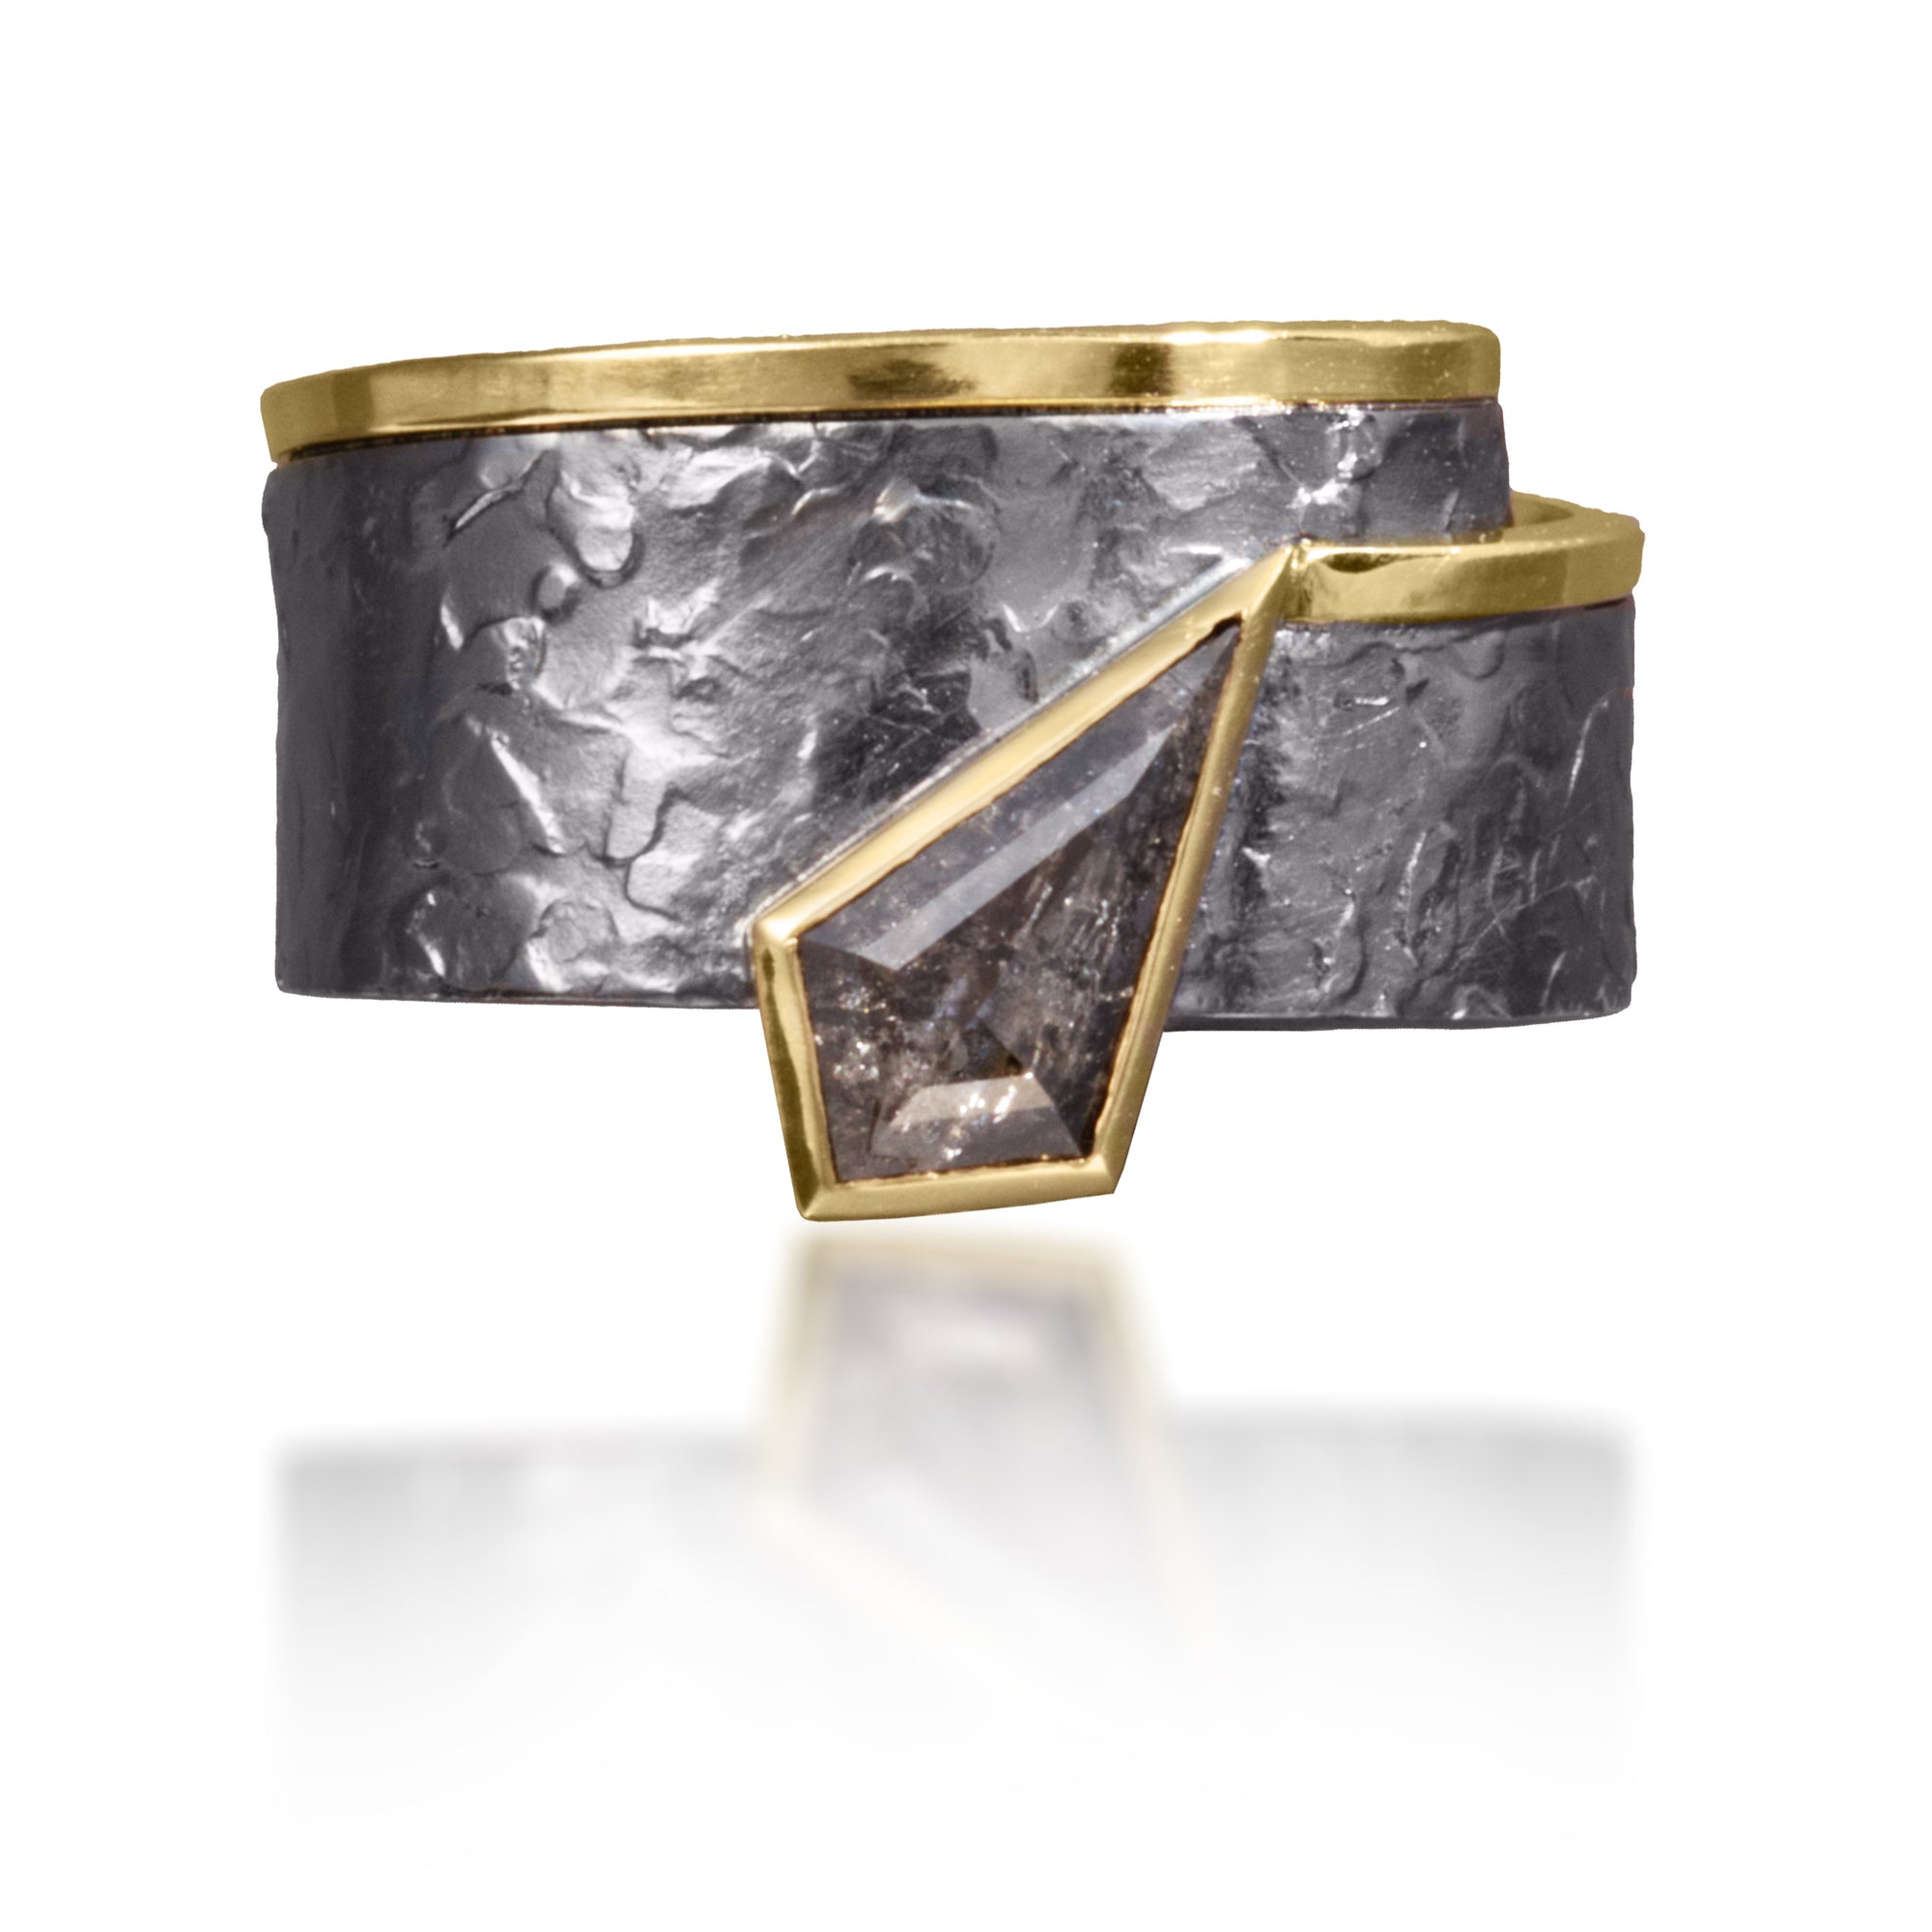 This simple, yet distinctive, one of kind ring in 18k gold and oxidized silver features a bezel set, “salt and pepper” diamond, 0.80 tcw.  It is forged, textured and fabricated by hand. 